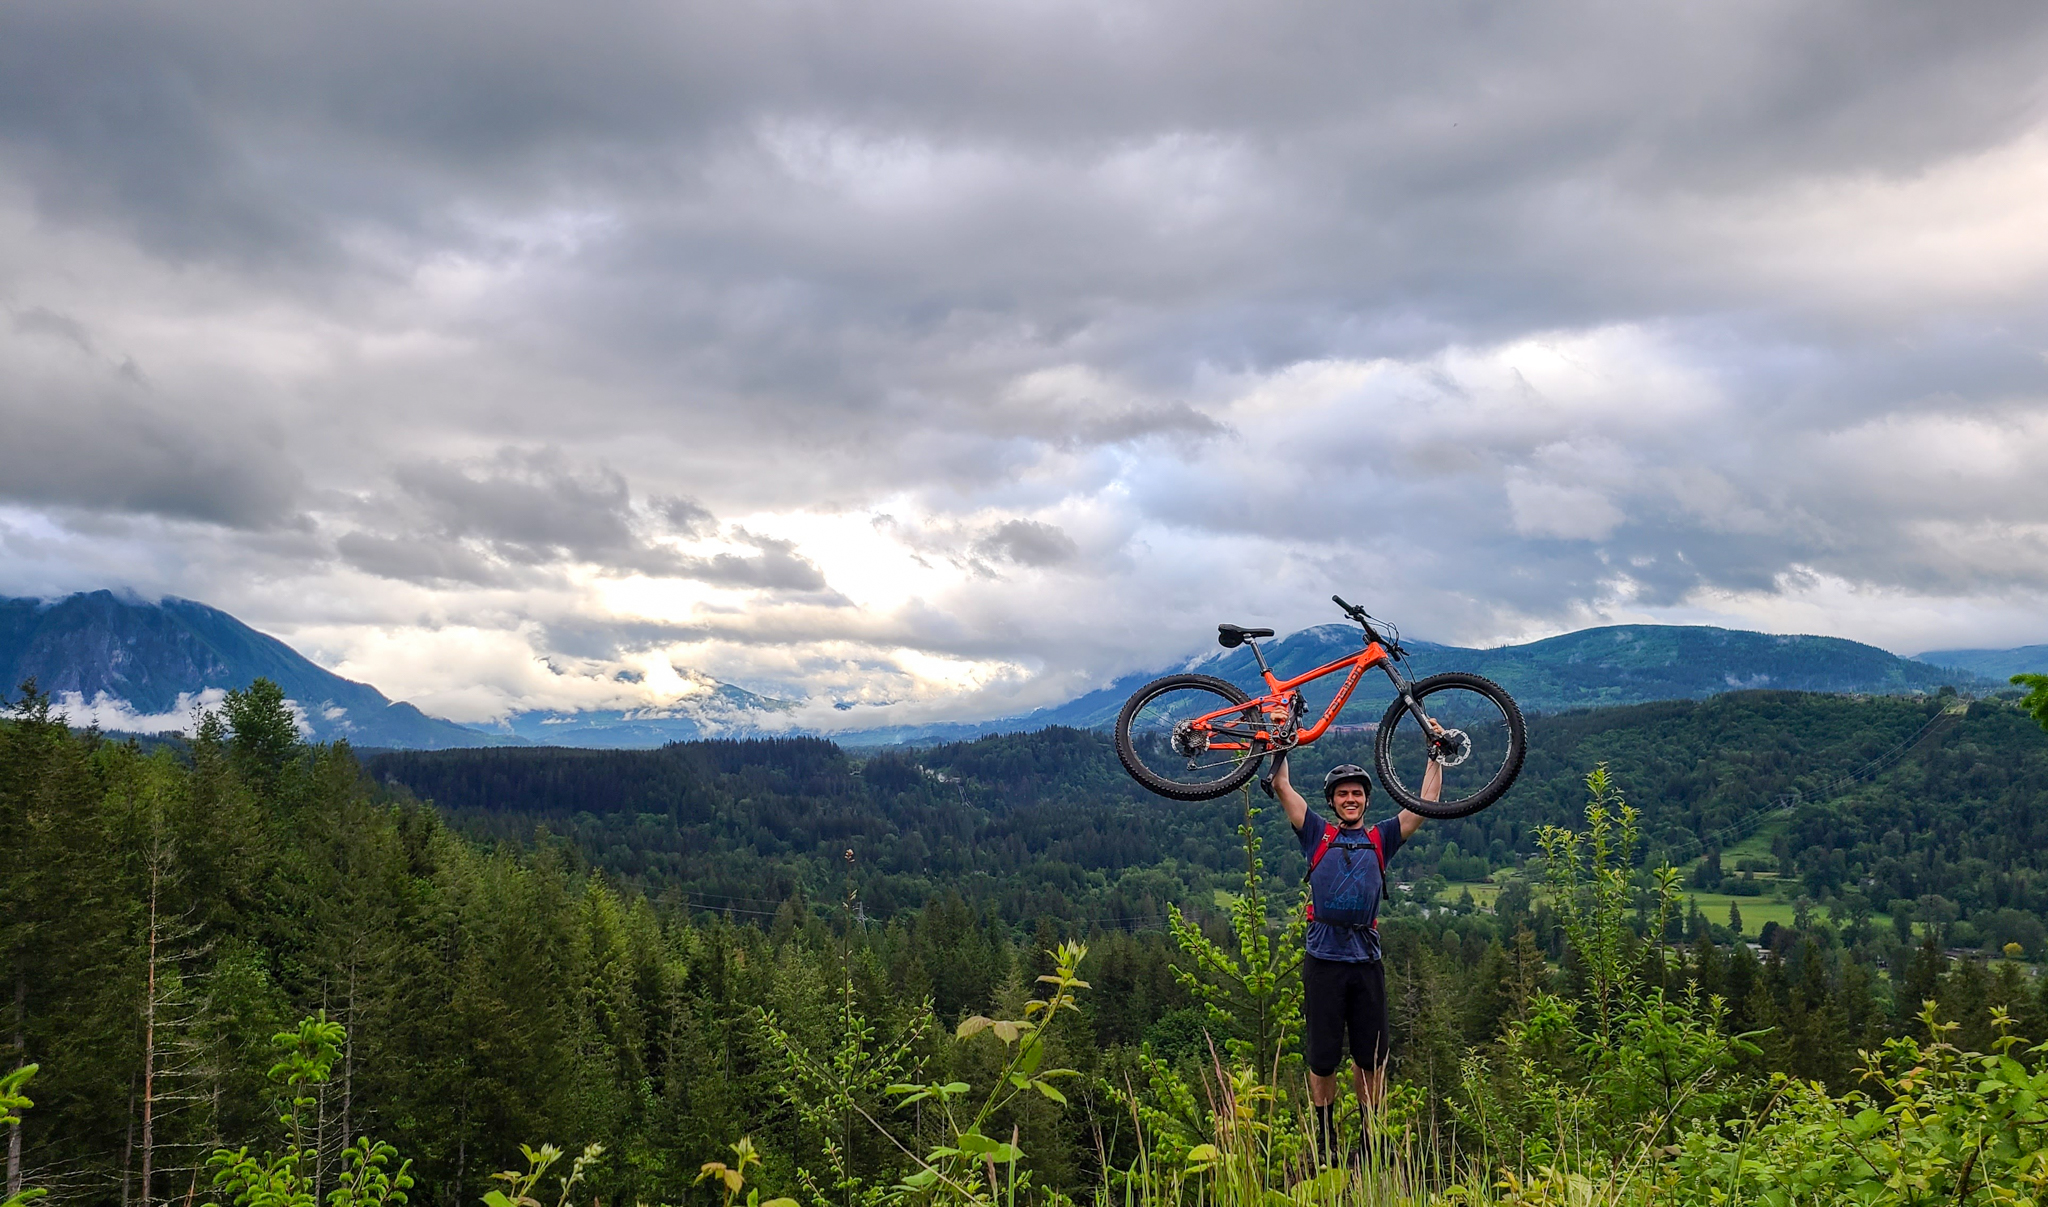 Tyler Weir on a mountainside holding a bike over his head.